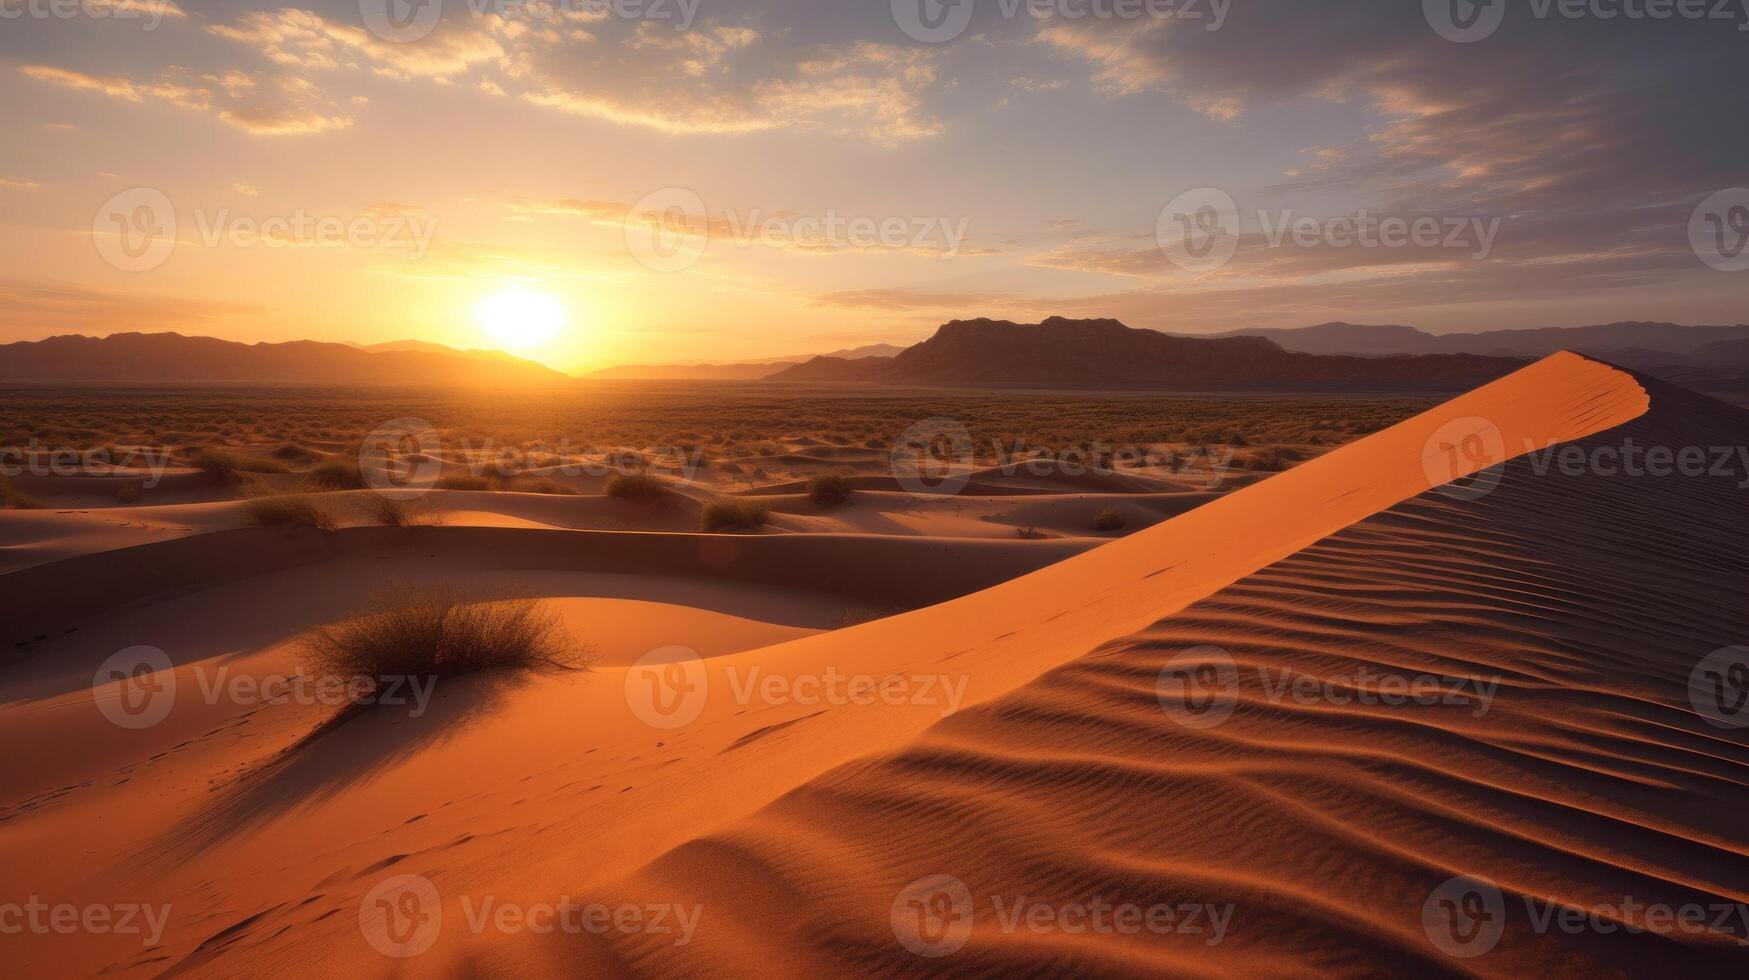 Landscape of a sunset over desert. Nature photography. photo